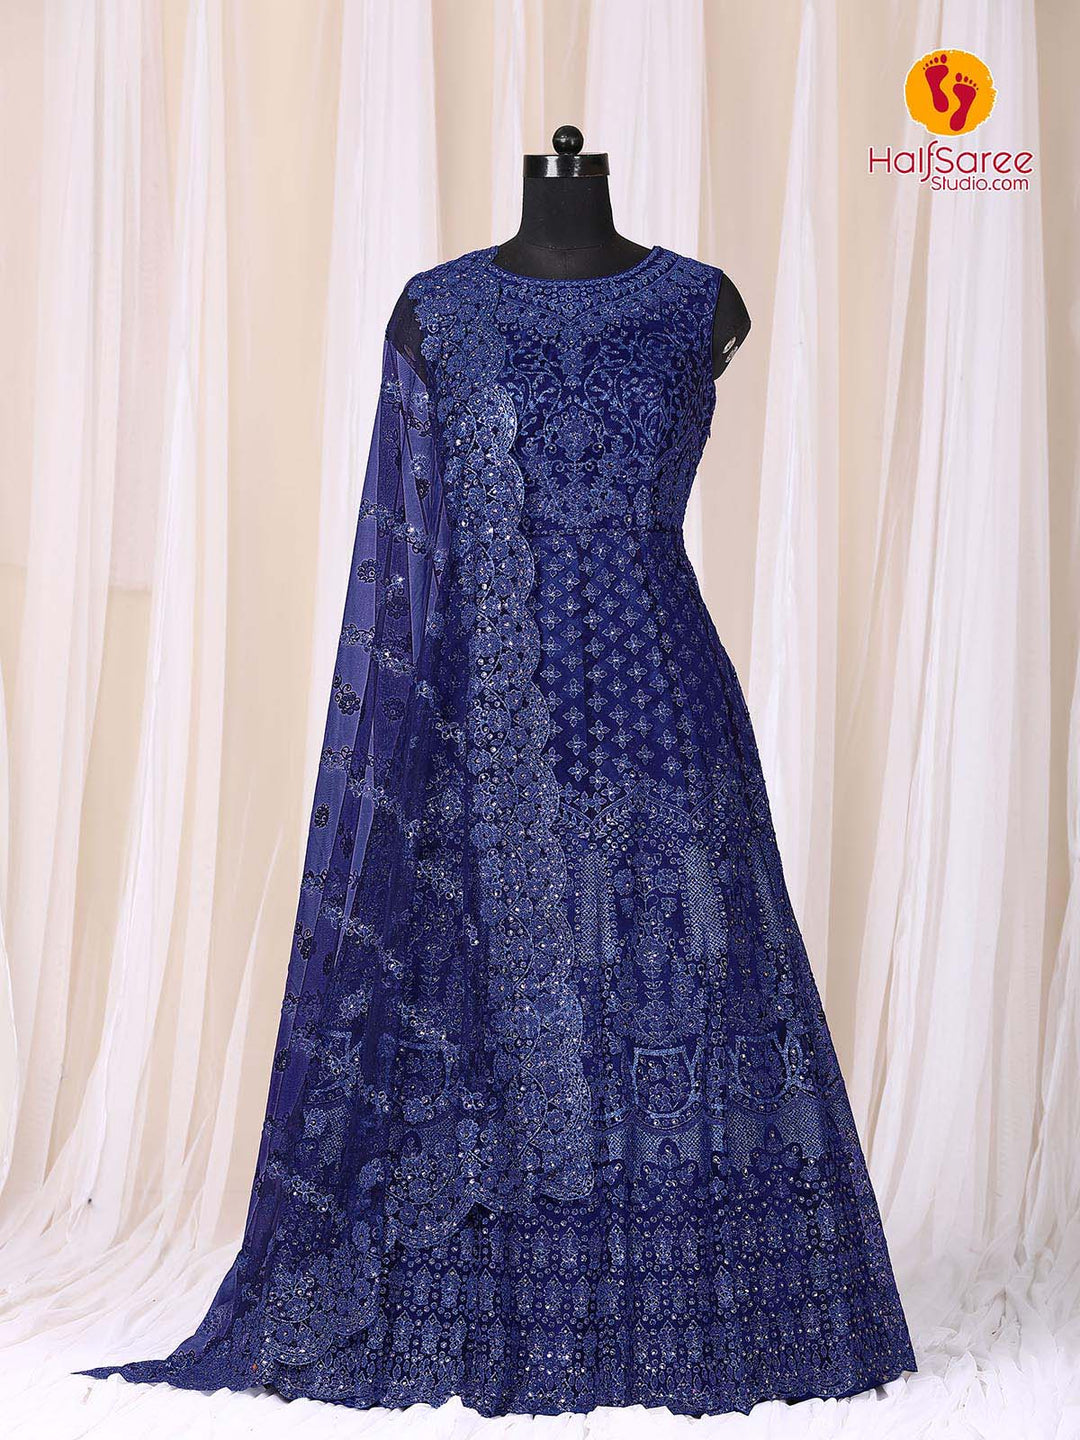 Dummy has dressed up with blue colour net gown with embroidered work